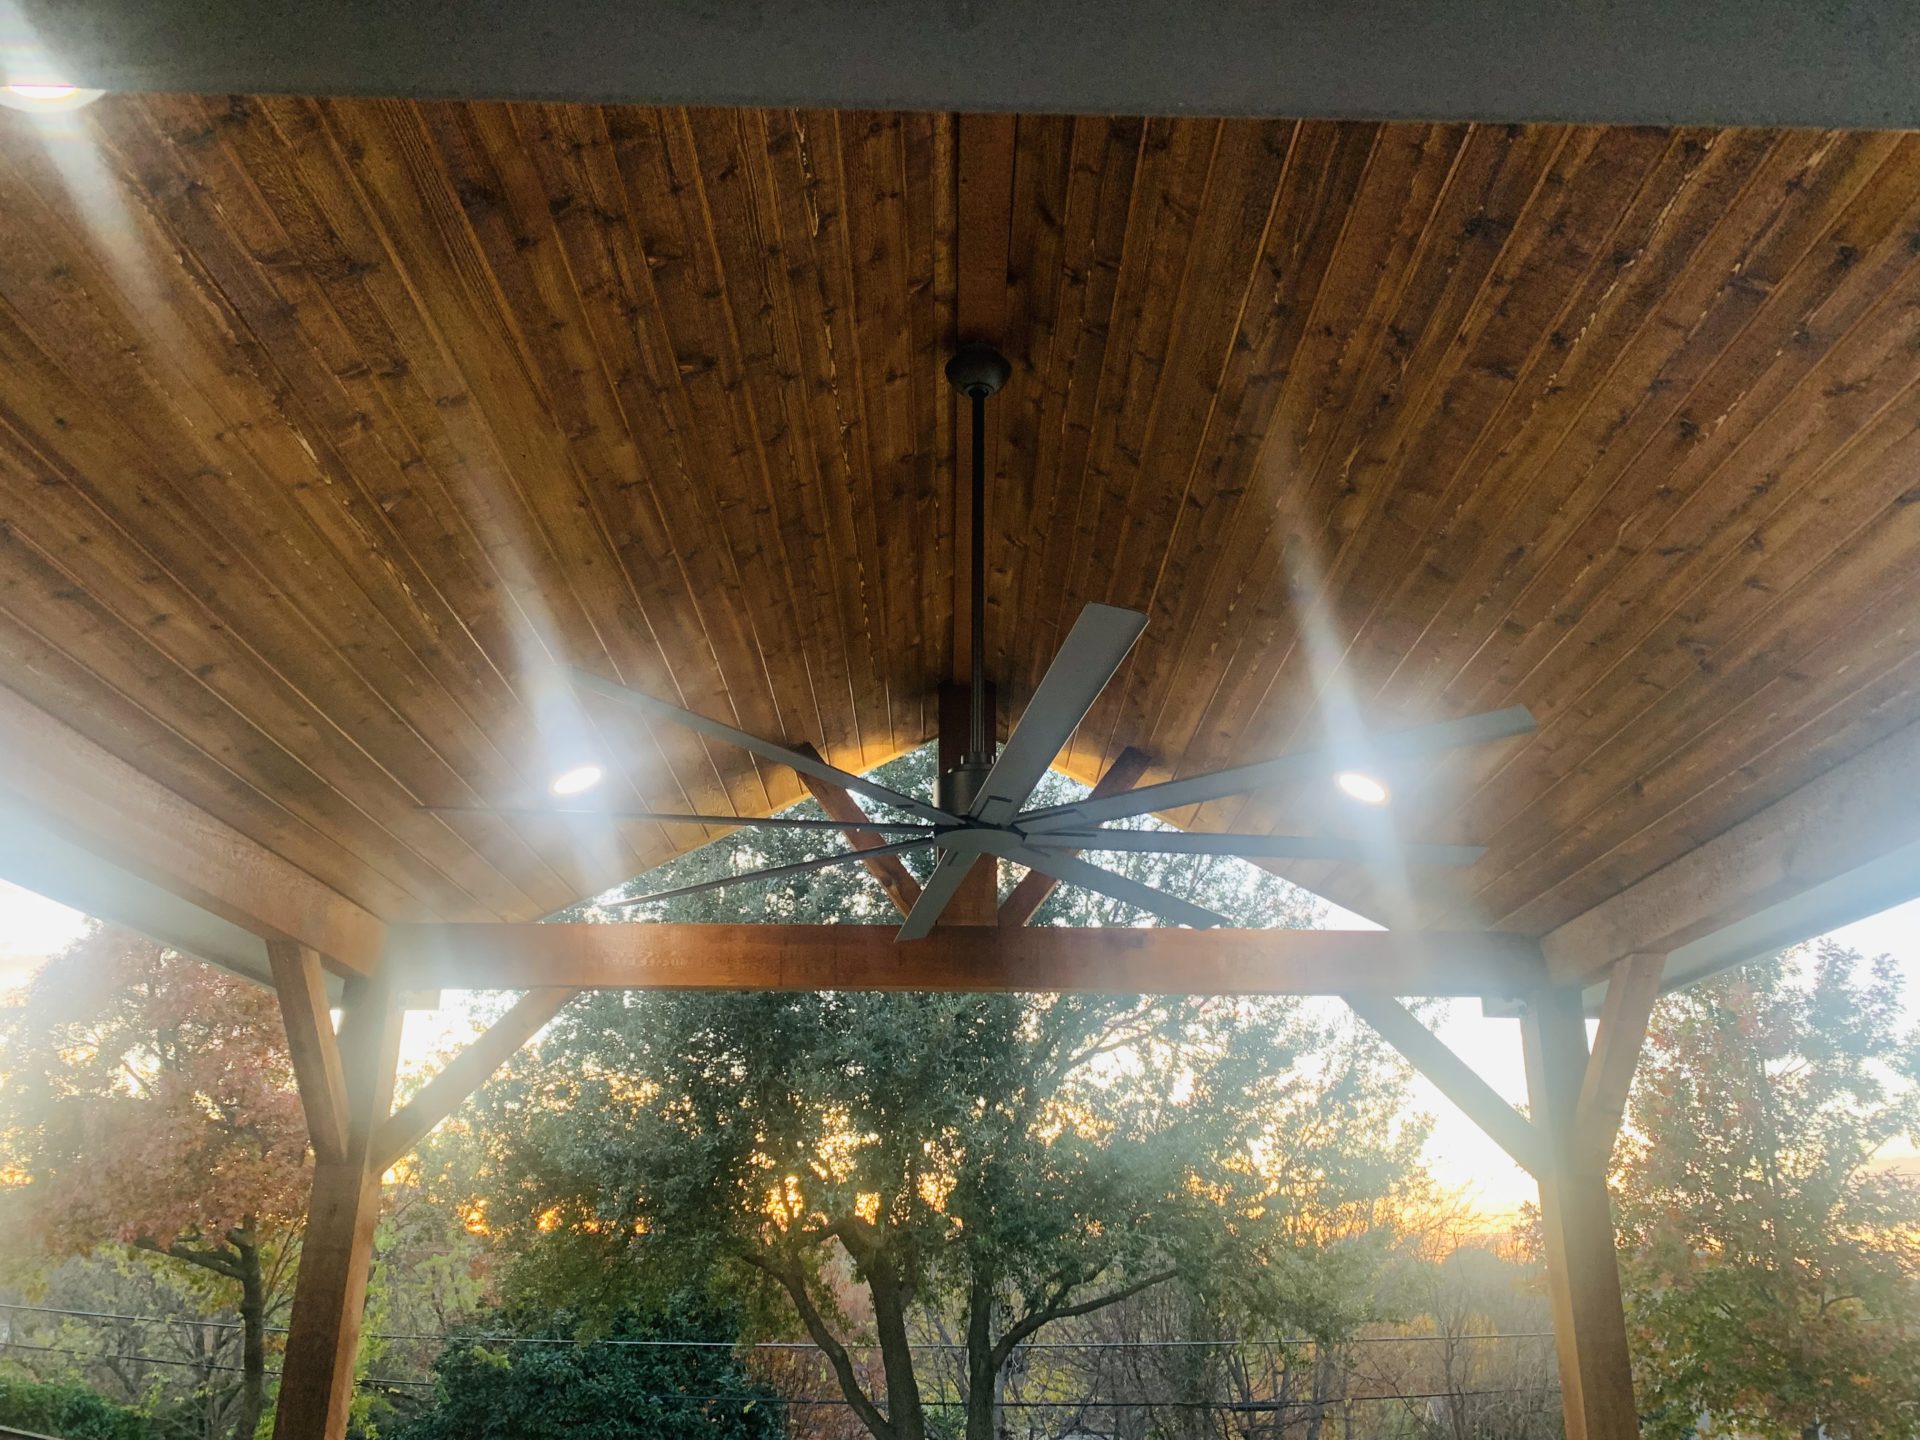 Outdoor patio project by Jenkins Roofing with roof extending from the house, large outdoor ceiling fan and custom patio lights in wooden roof.